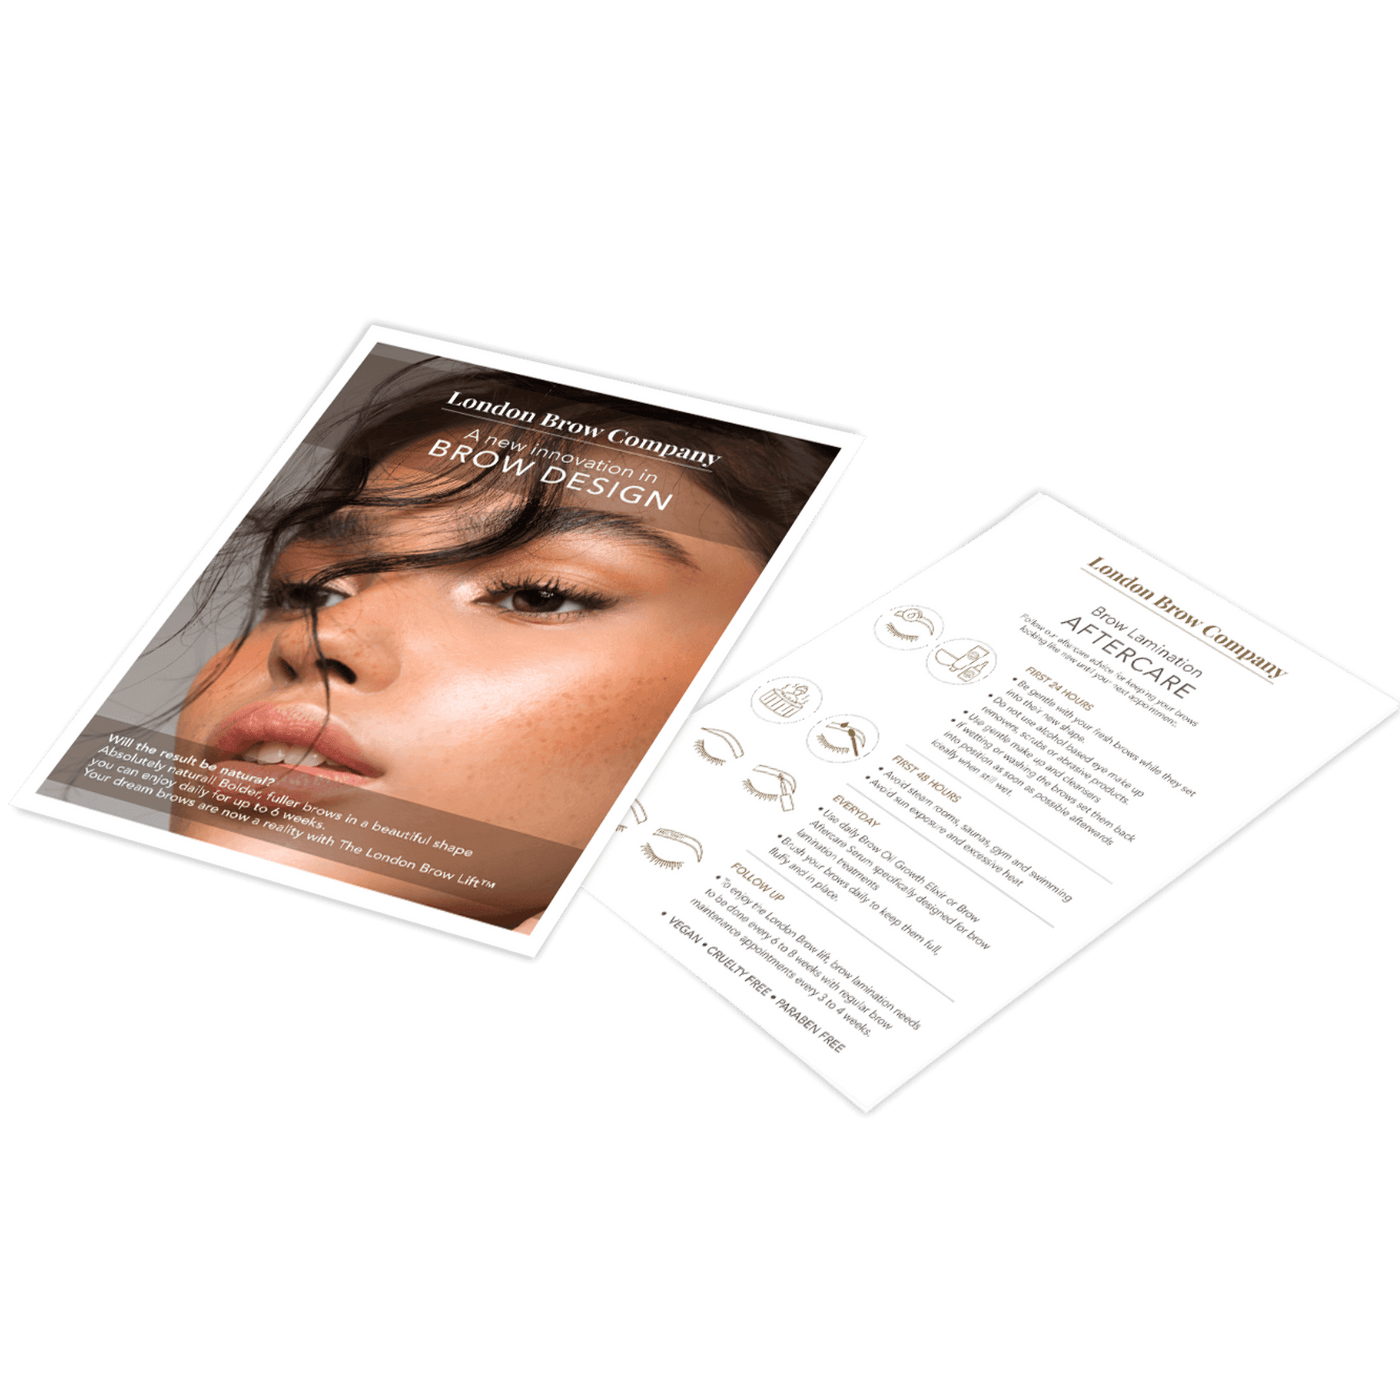 Brow Lamination Marketing Leaflets and Aftercare Cards - The London Brow Company